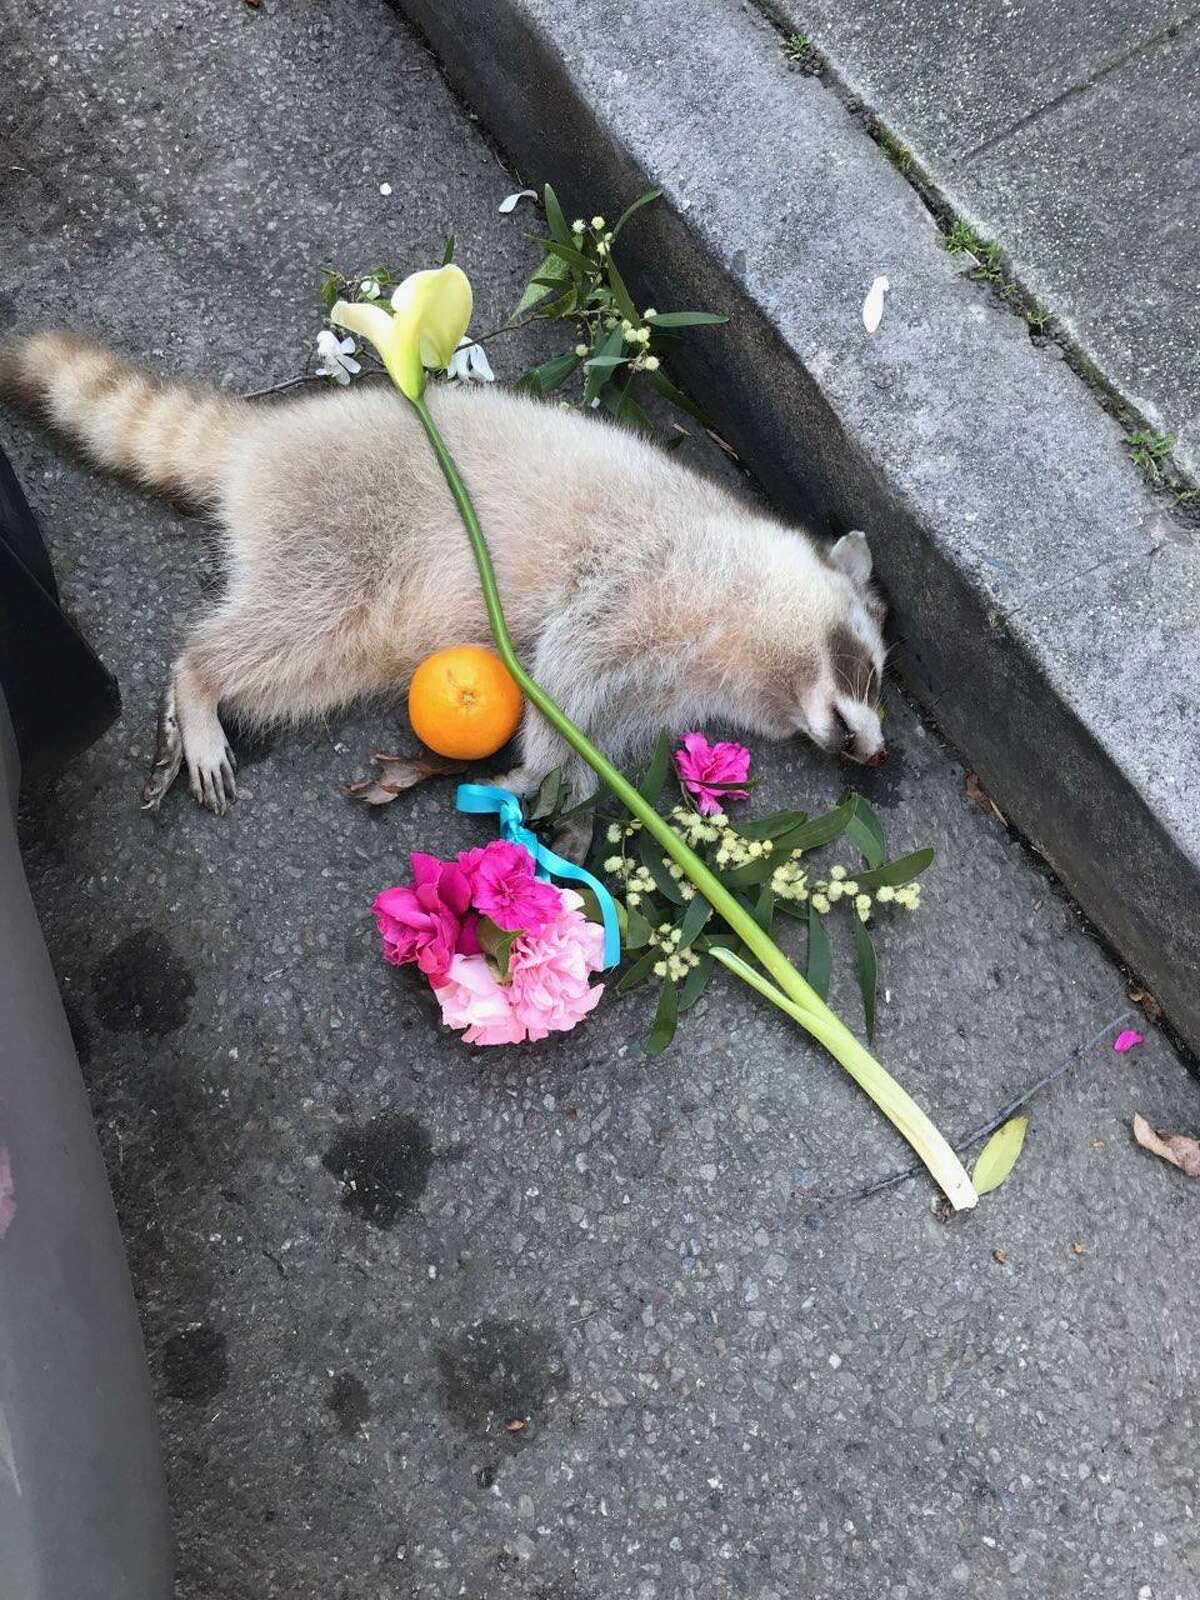 Oakland residents created a memorial to a dead raccoon after it was found on the side of the road in the city's Adams Point neighborhood.